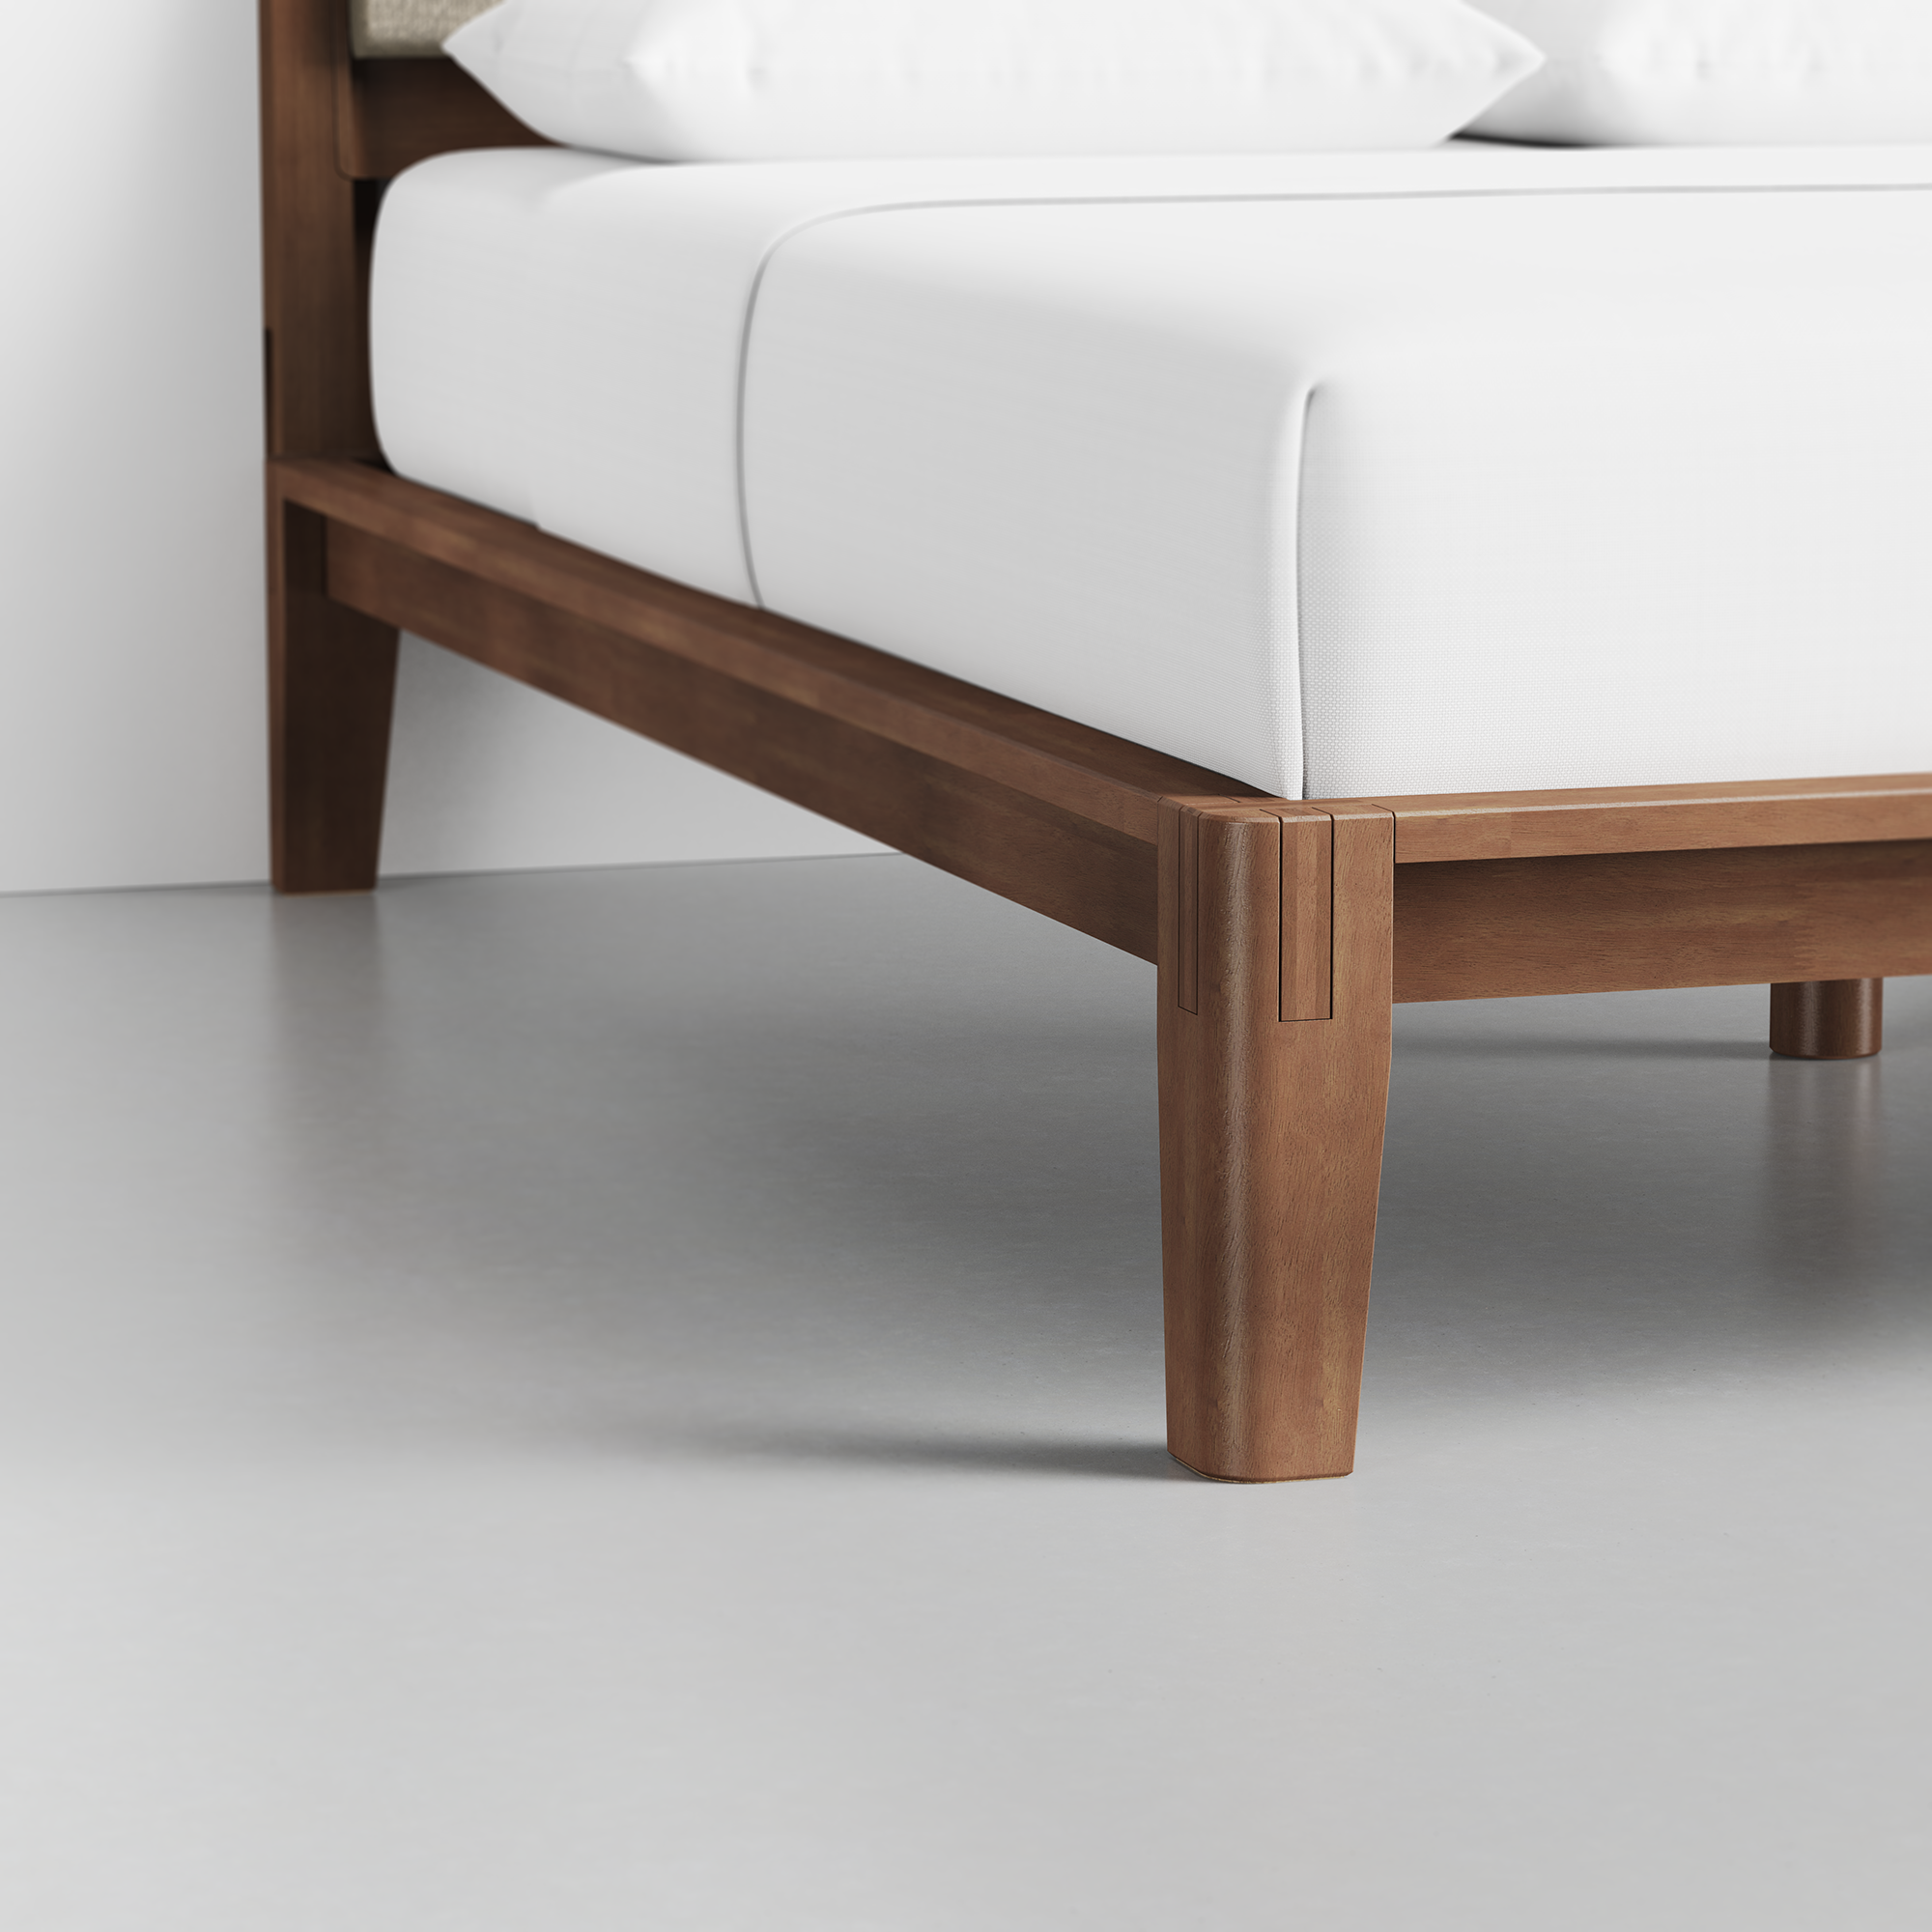 The Bed (Walnut / HB Cushion Cafe) - Render - Foot Detail